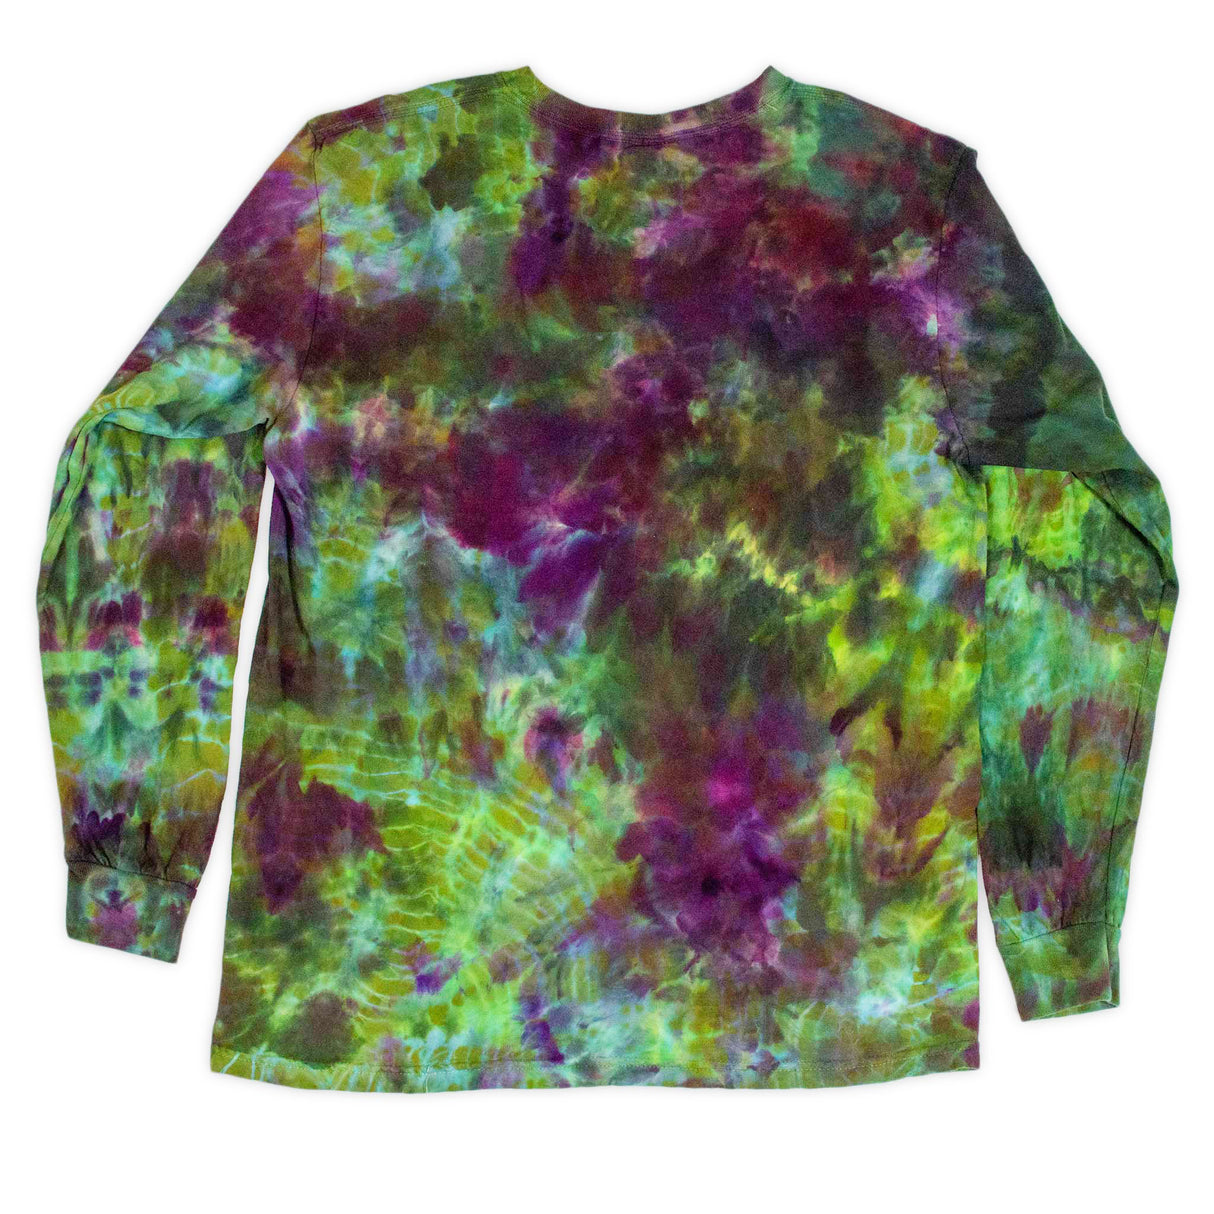 A mesmerizing tie-dye long sleeve shirt, with a fusion of emerald green, lavender, and burgundy hues.